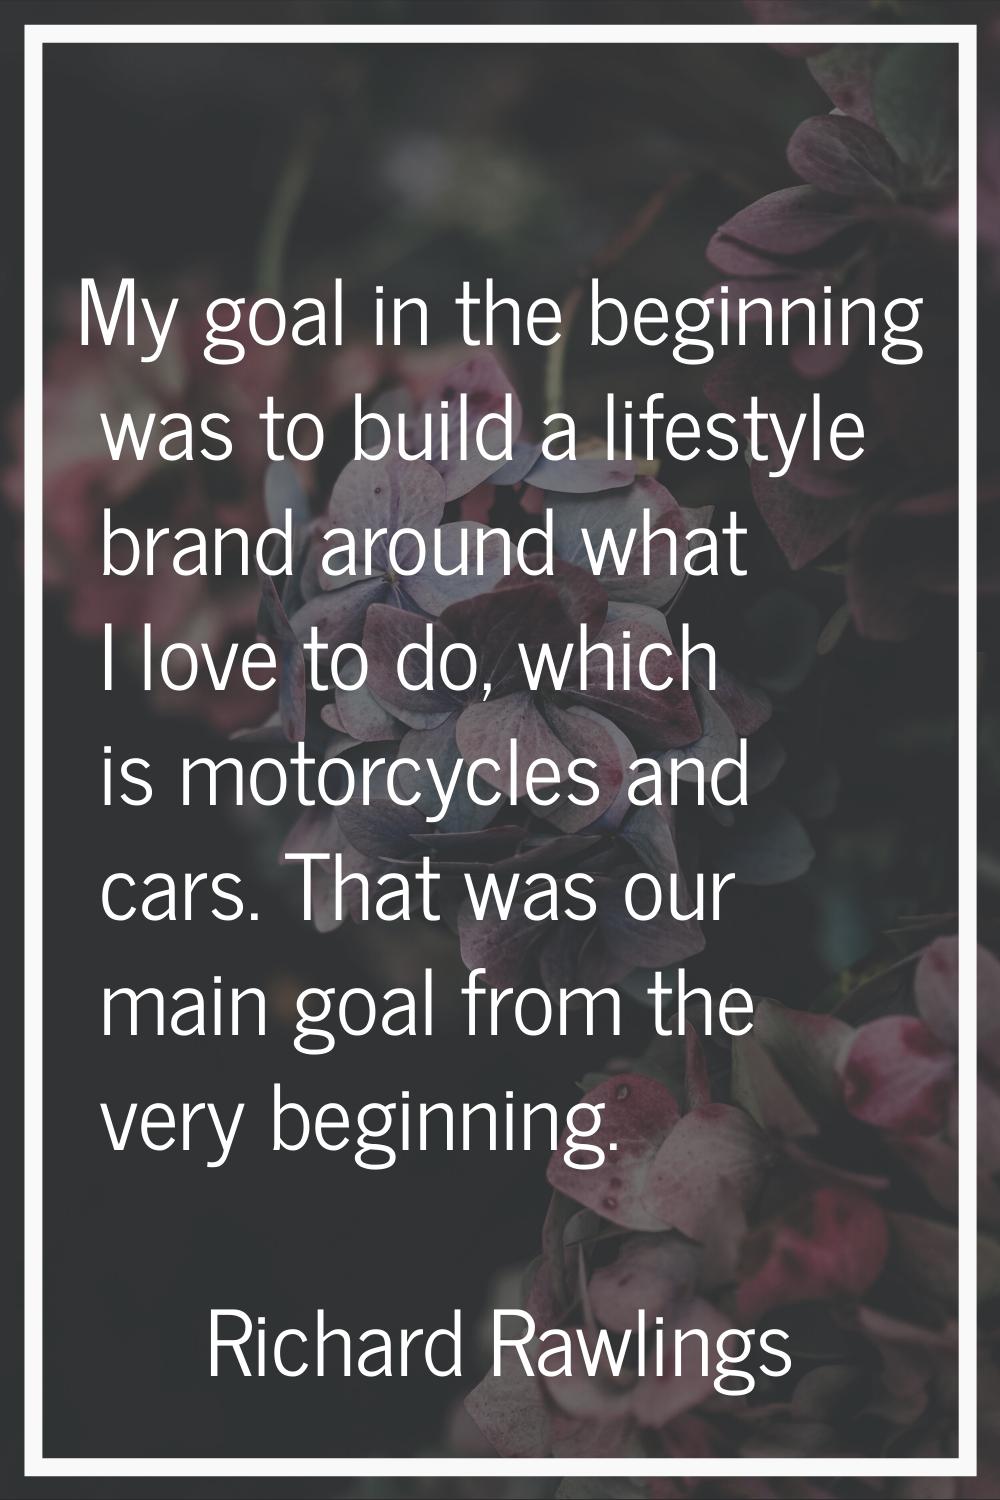 My goal in the beginning was to build a lifestyle brand around what I love to do, which is motorcyc